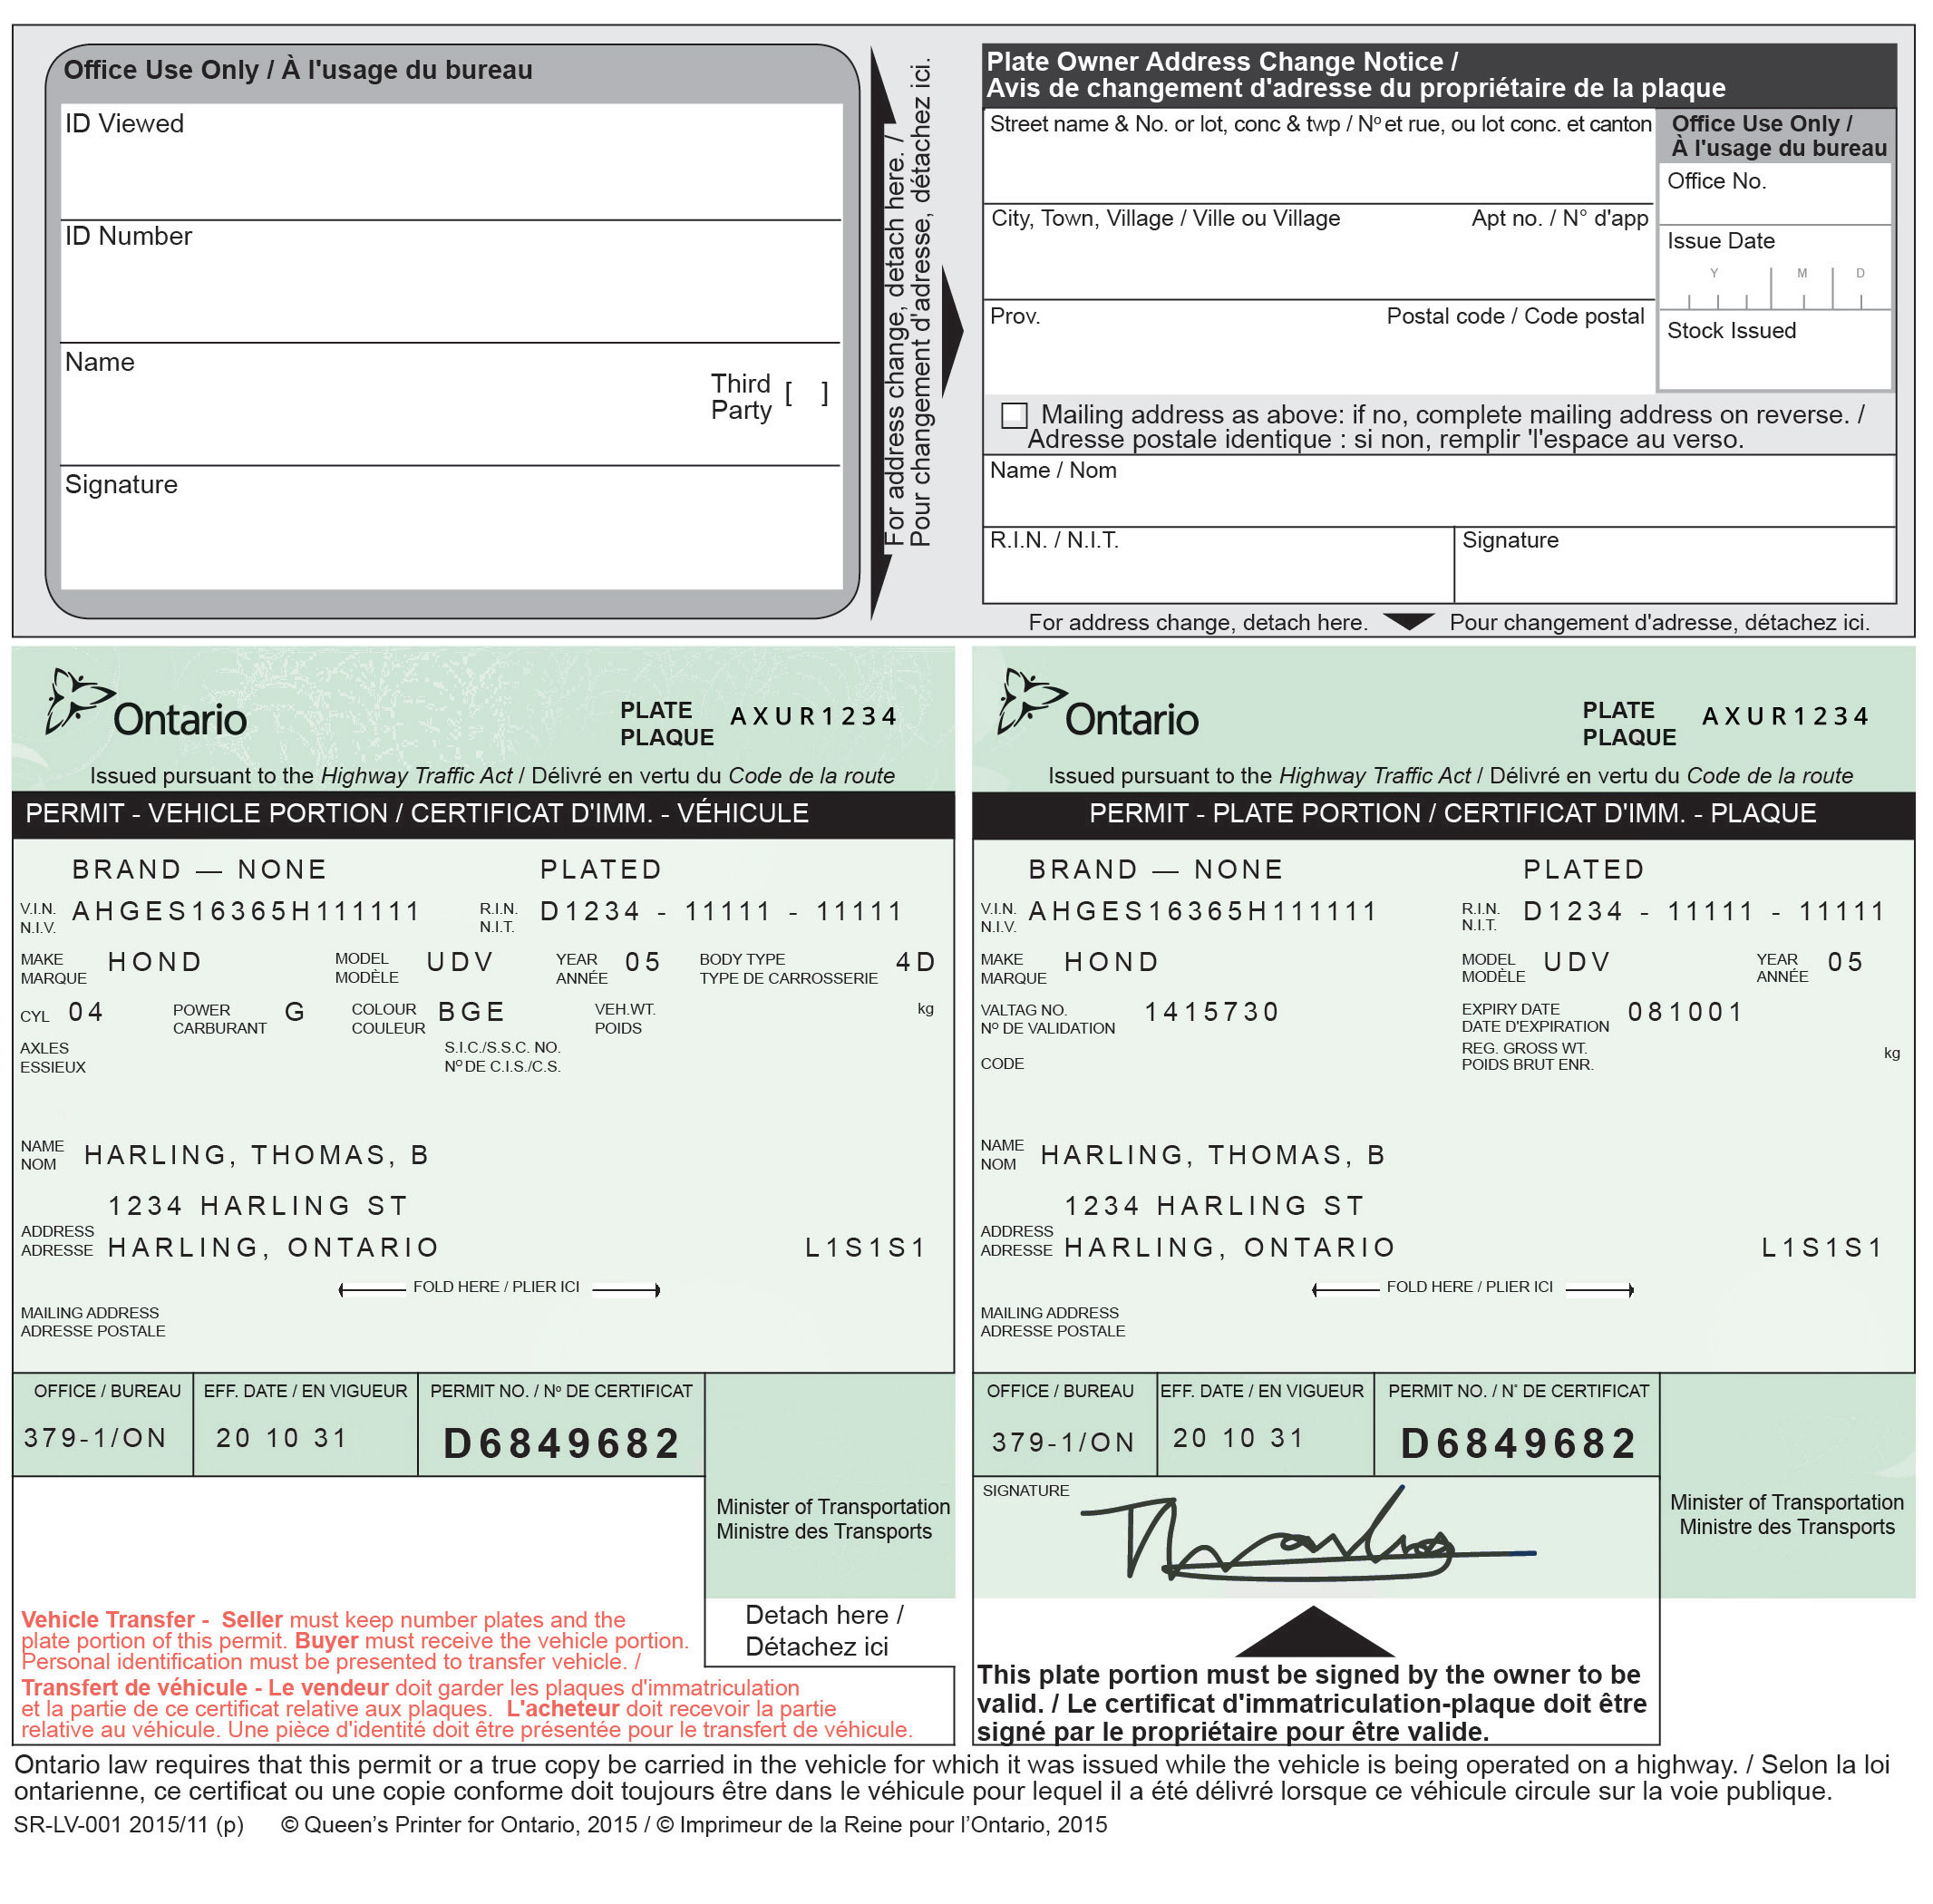 This is an image of a vehicle permit. It is green and has a vehicle portion on the left and a plate portion on the right. At the bottom of the plate portion, you will find the signature of the registered vehicle owner.